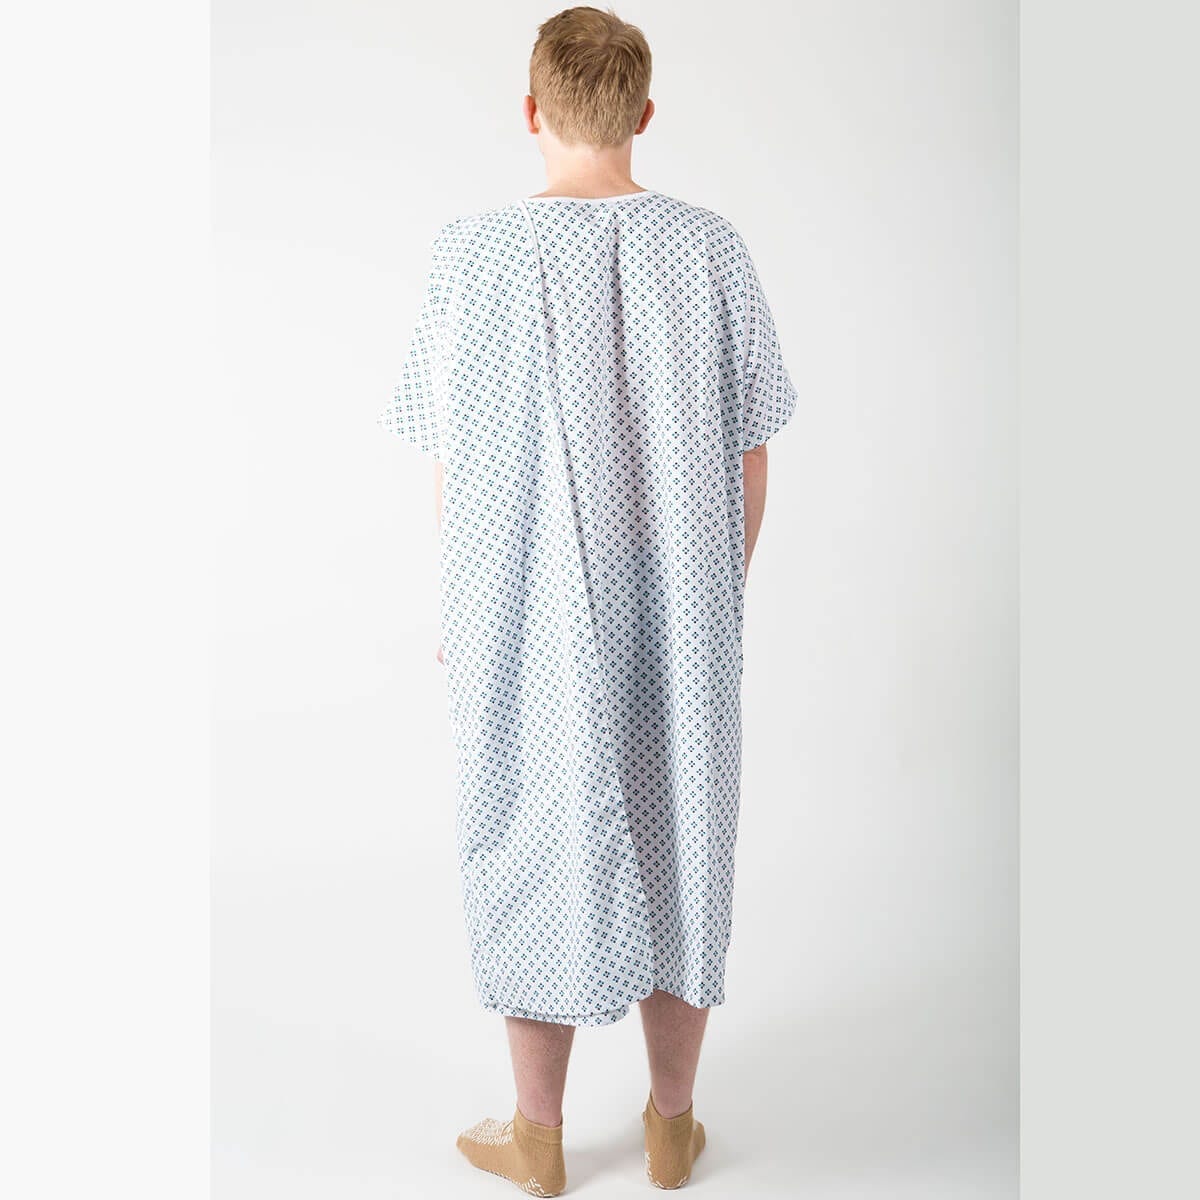 Hospital toga gown - rear view